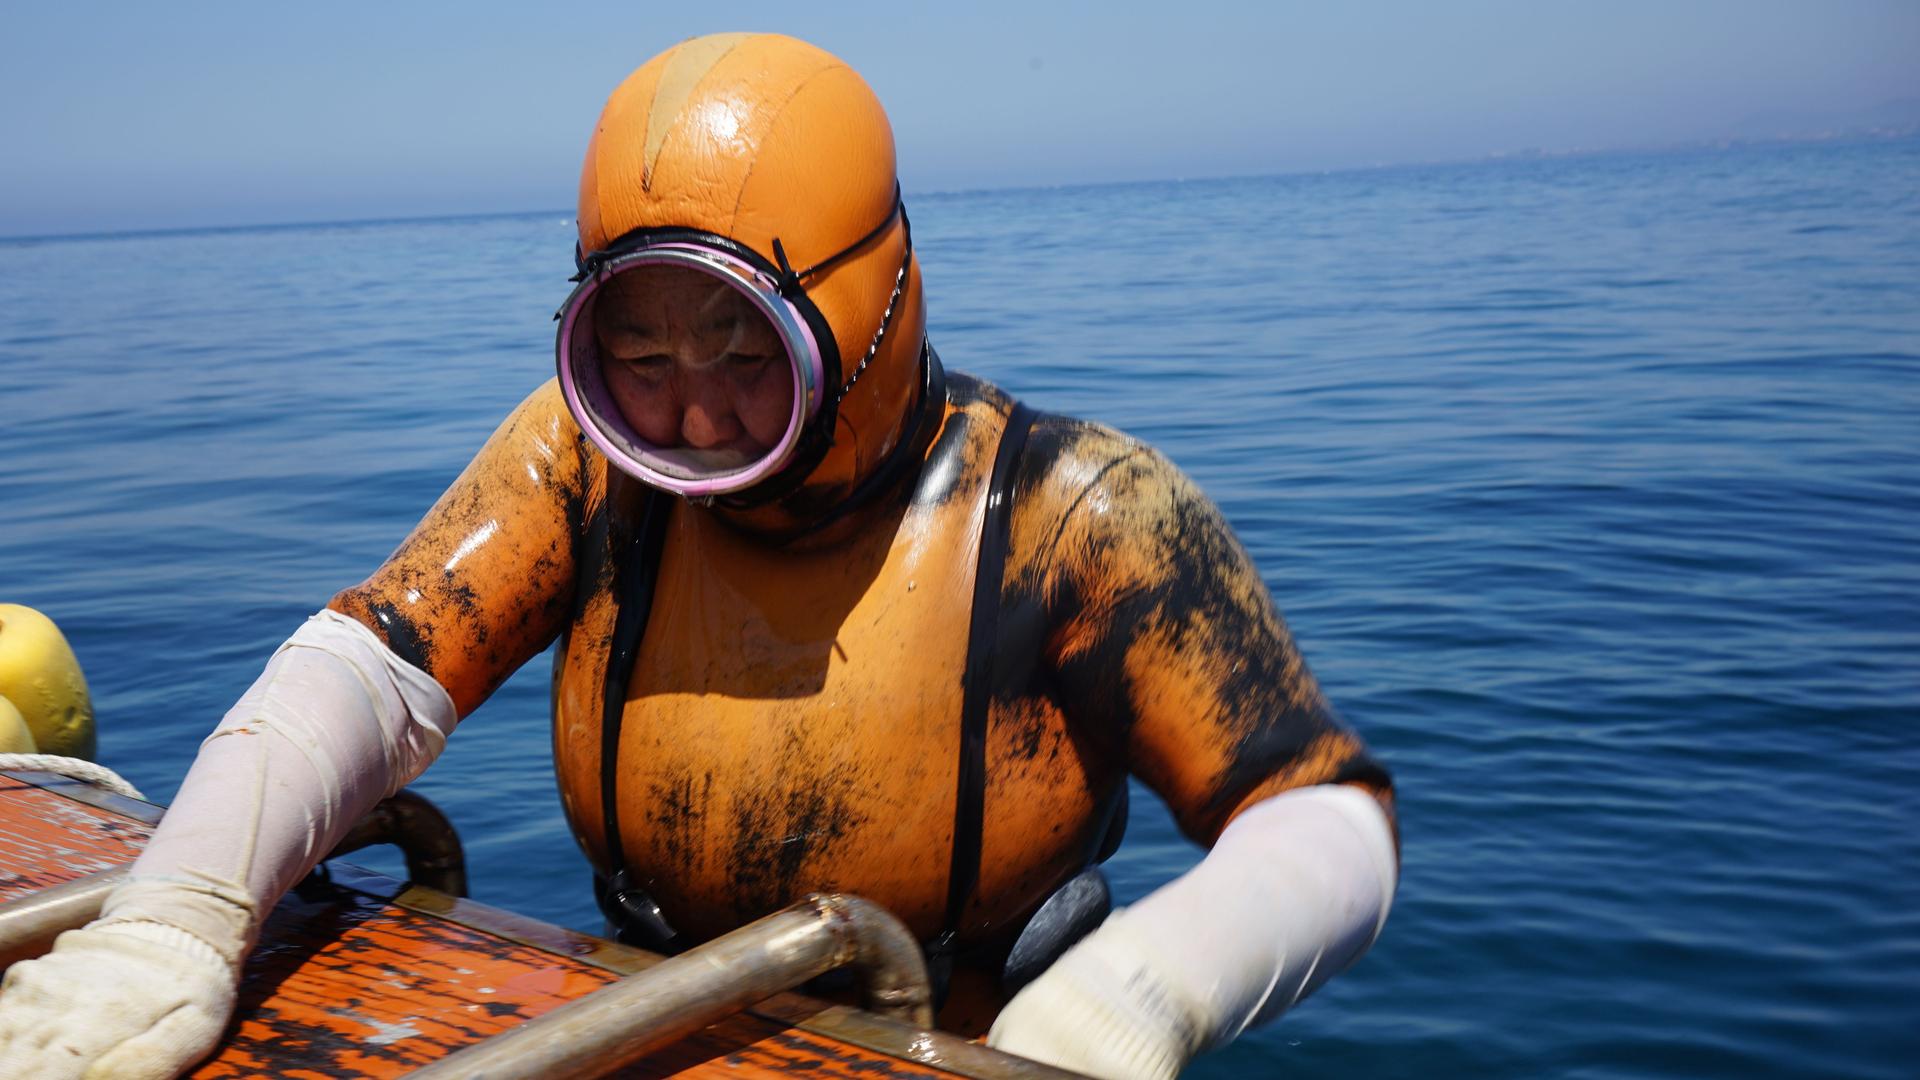 A haeynyo woman climbs aboard the boat. They wear orange diving suits so commercial ships can spot them more easily and steer clear.